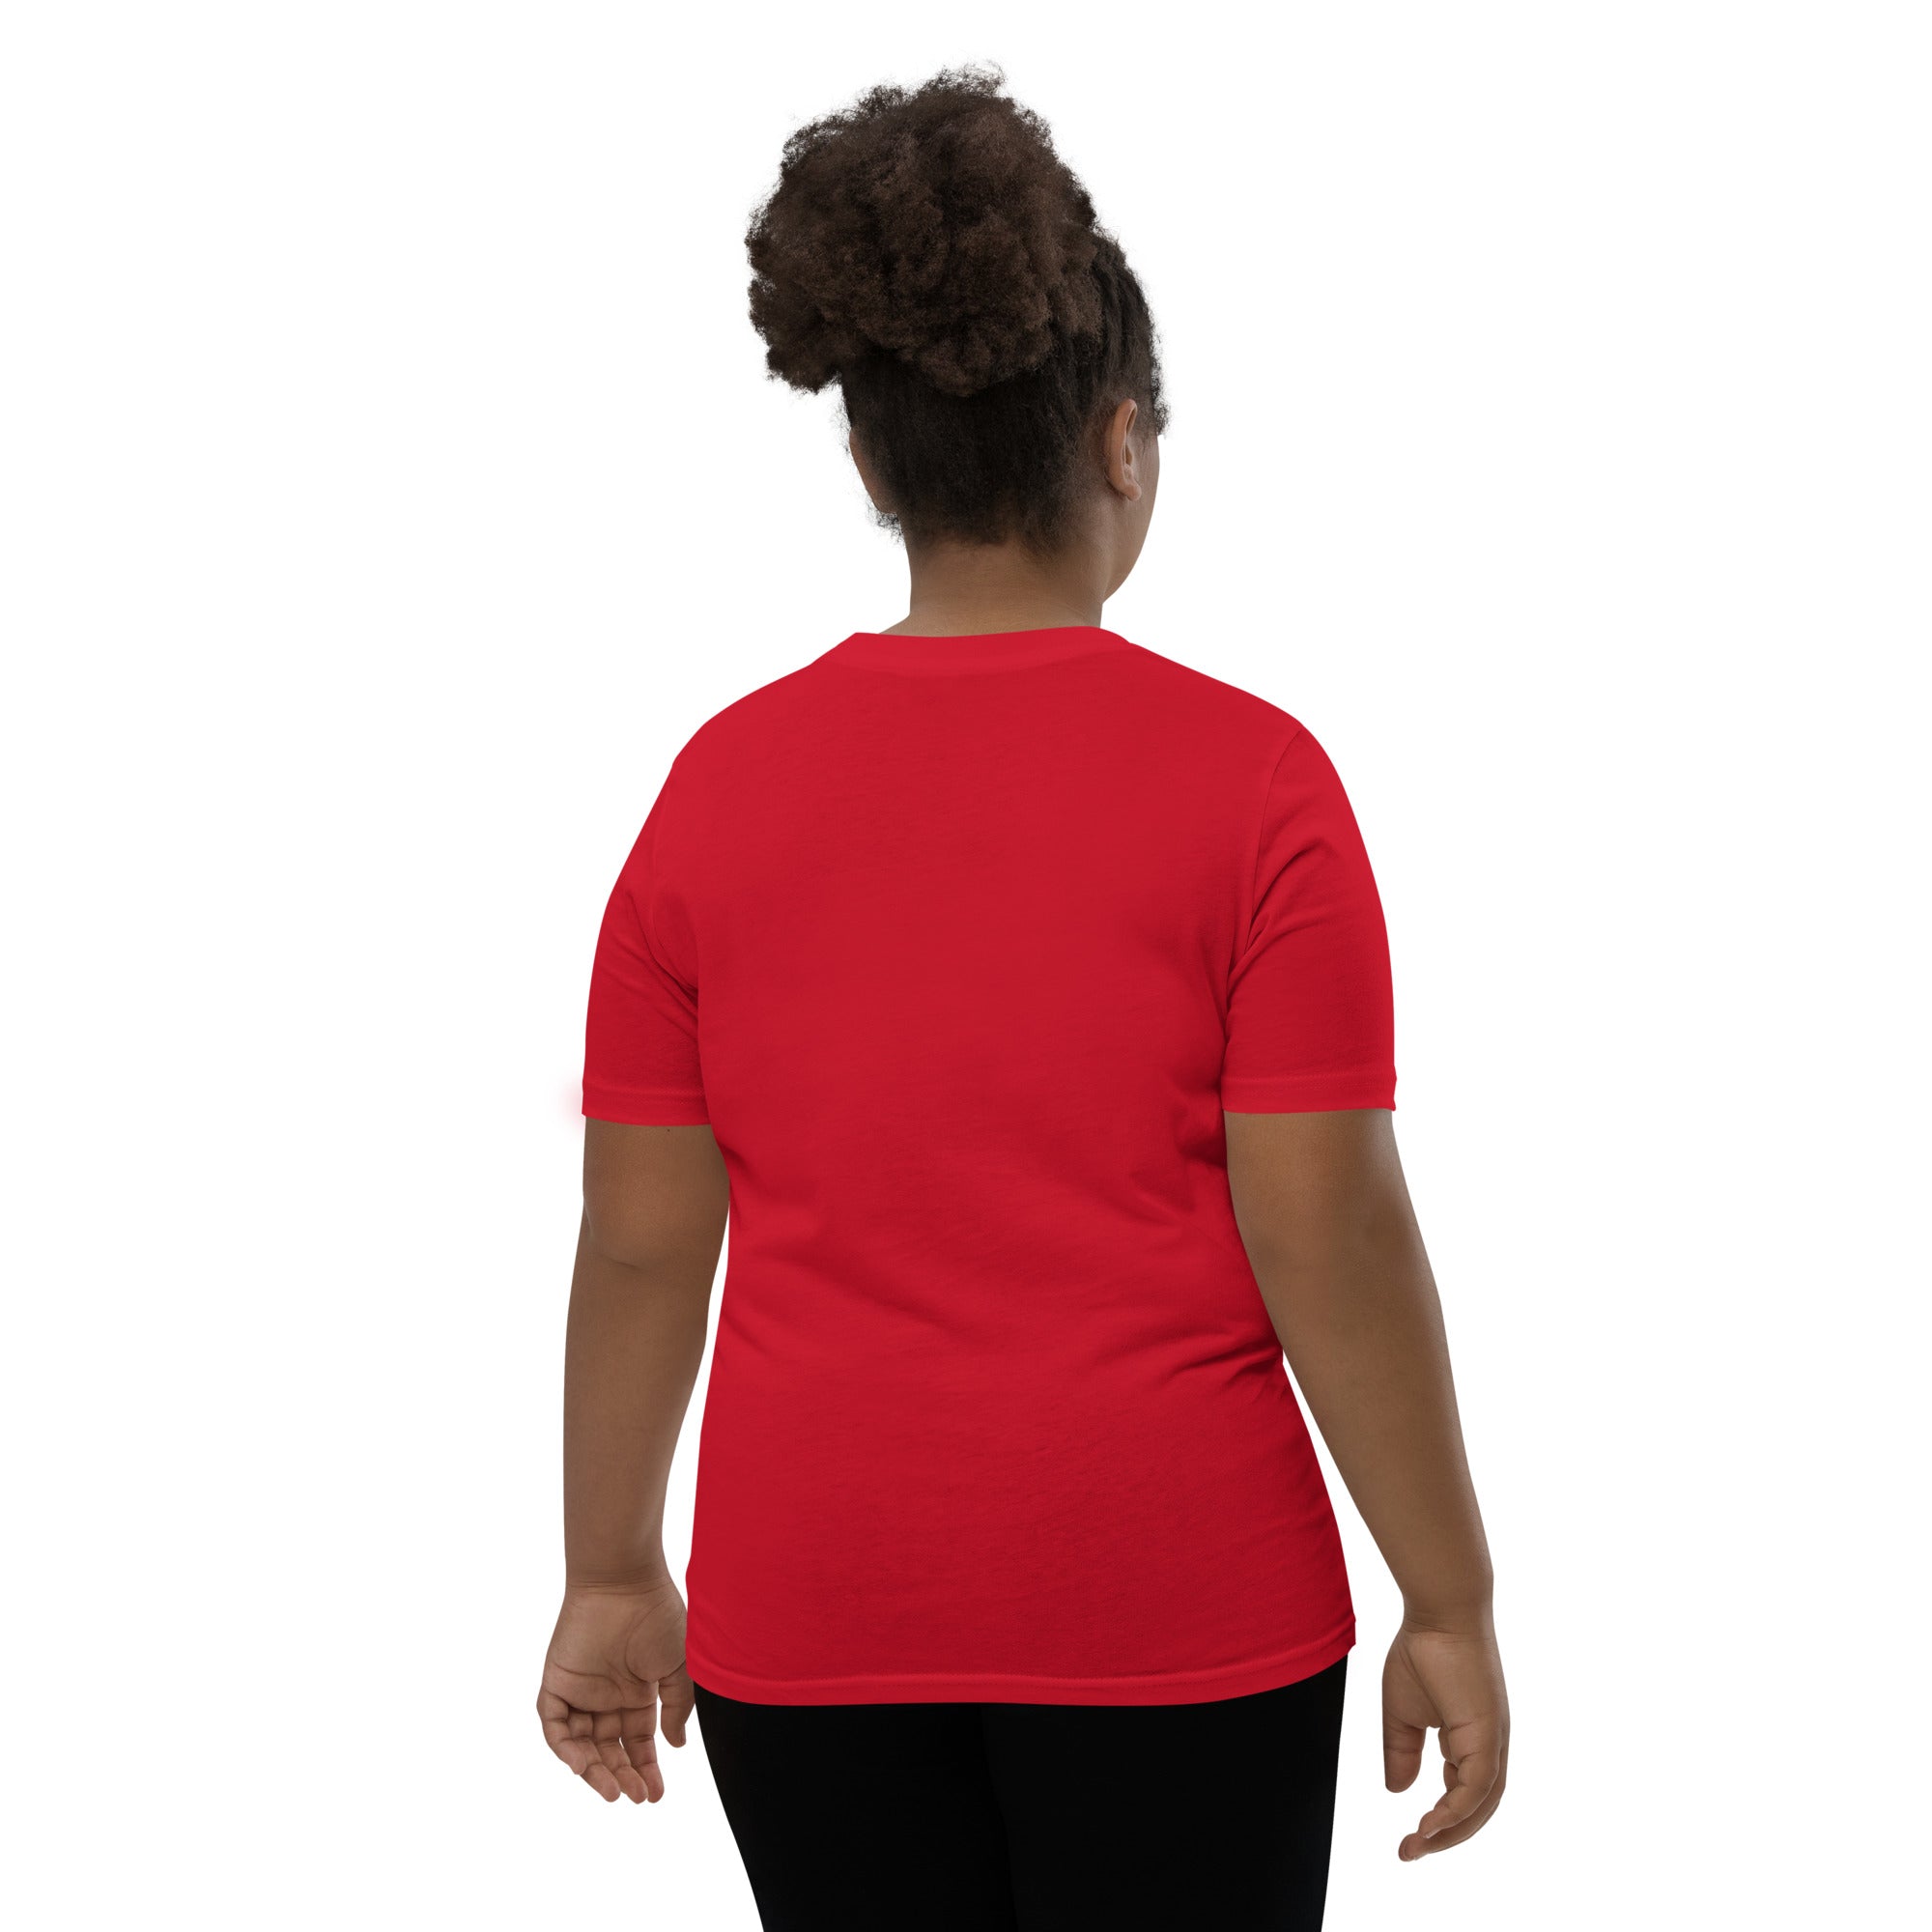 James River Expy Logo W - Red Youth Short Sleeve T-Shirt